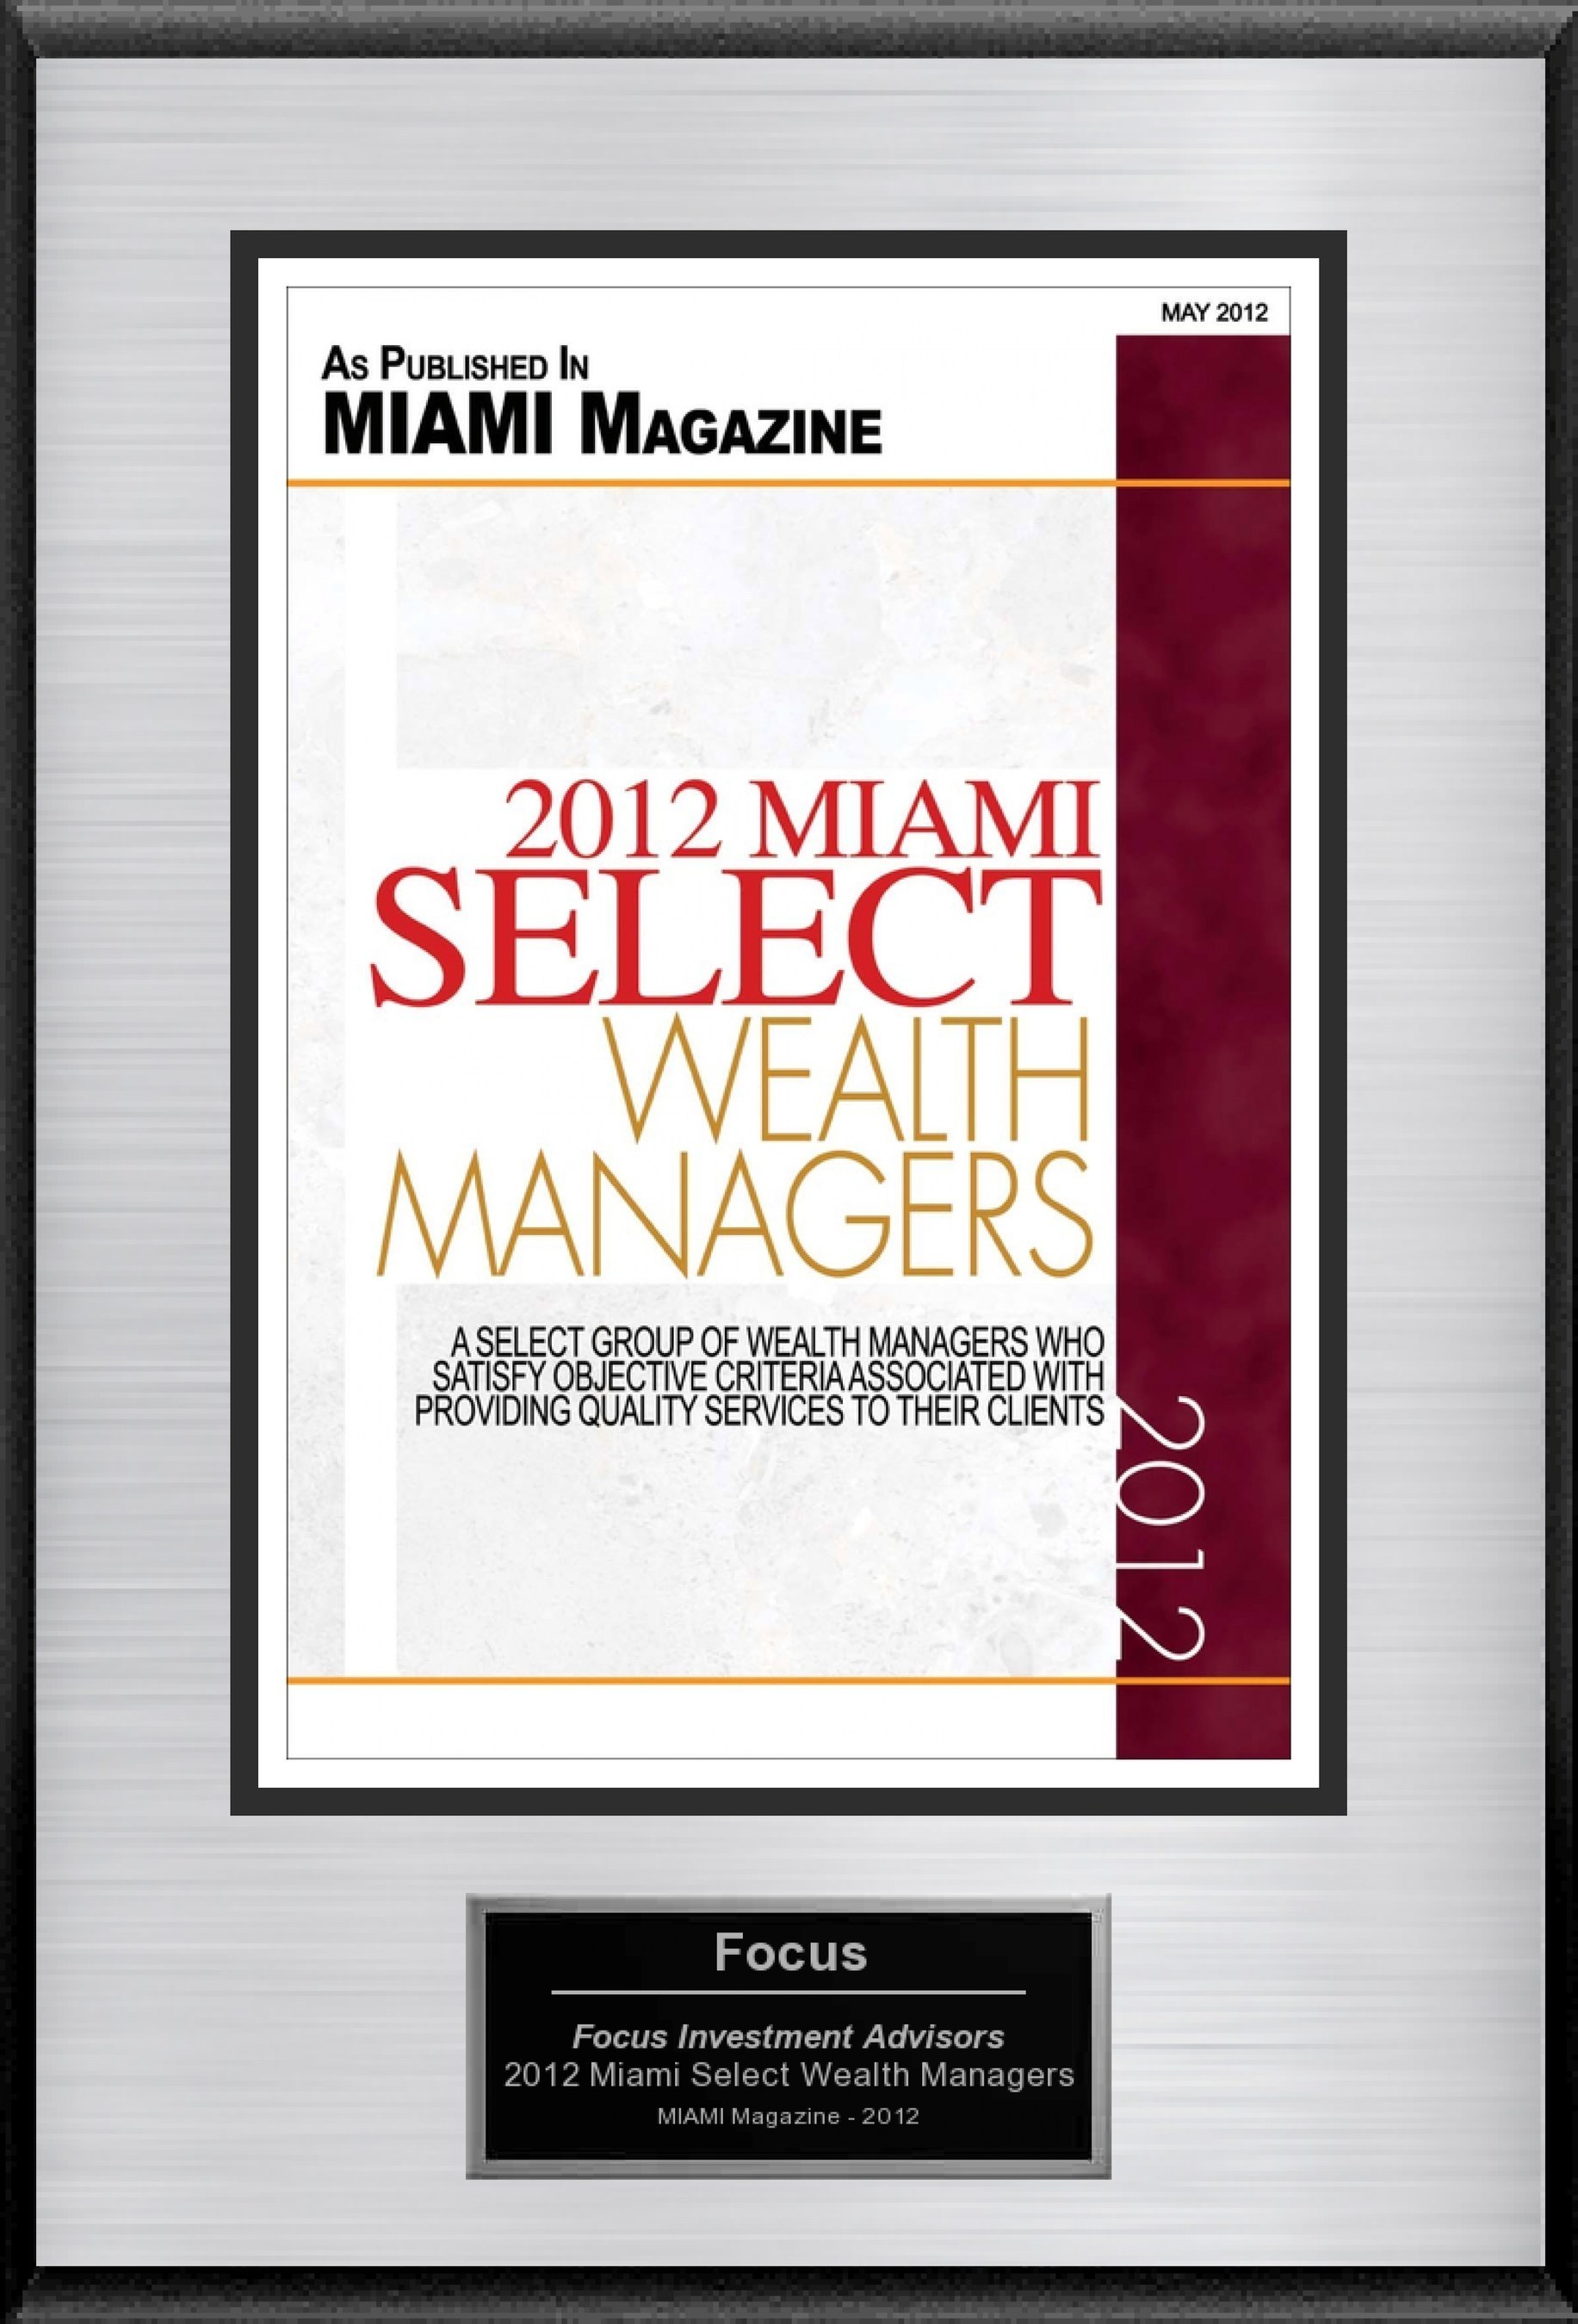 Marcelo Alves Selected For "2012 Miami Select Wealth Managers"